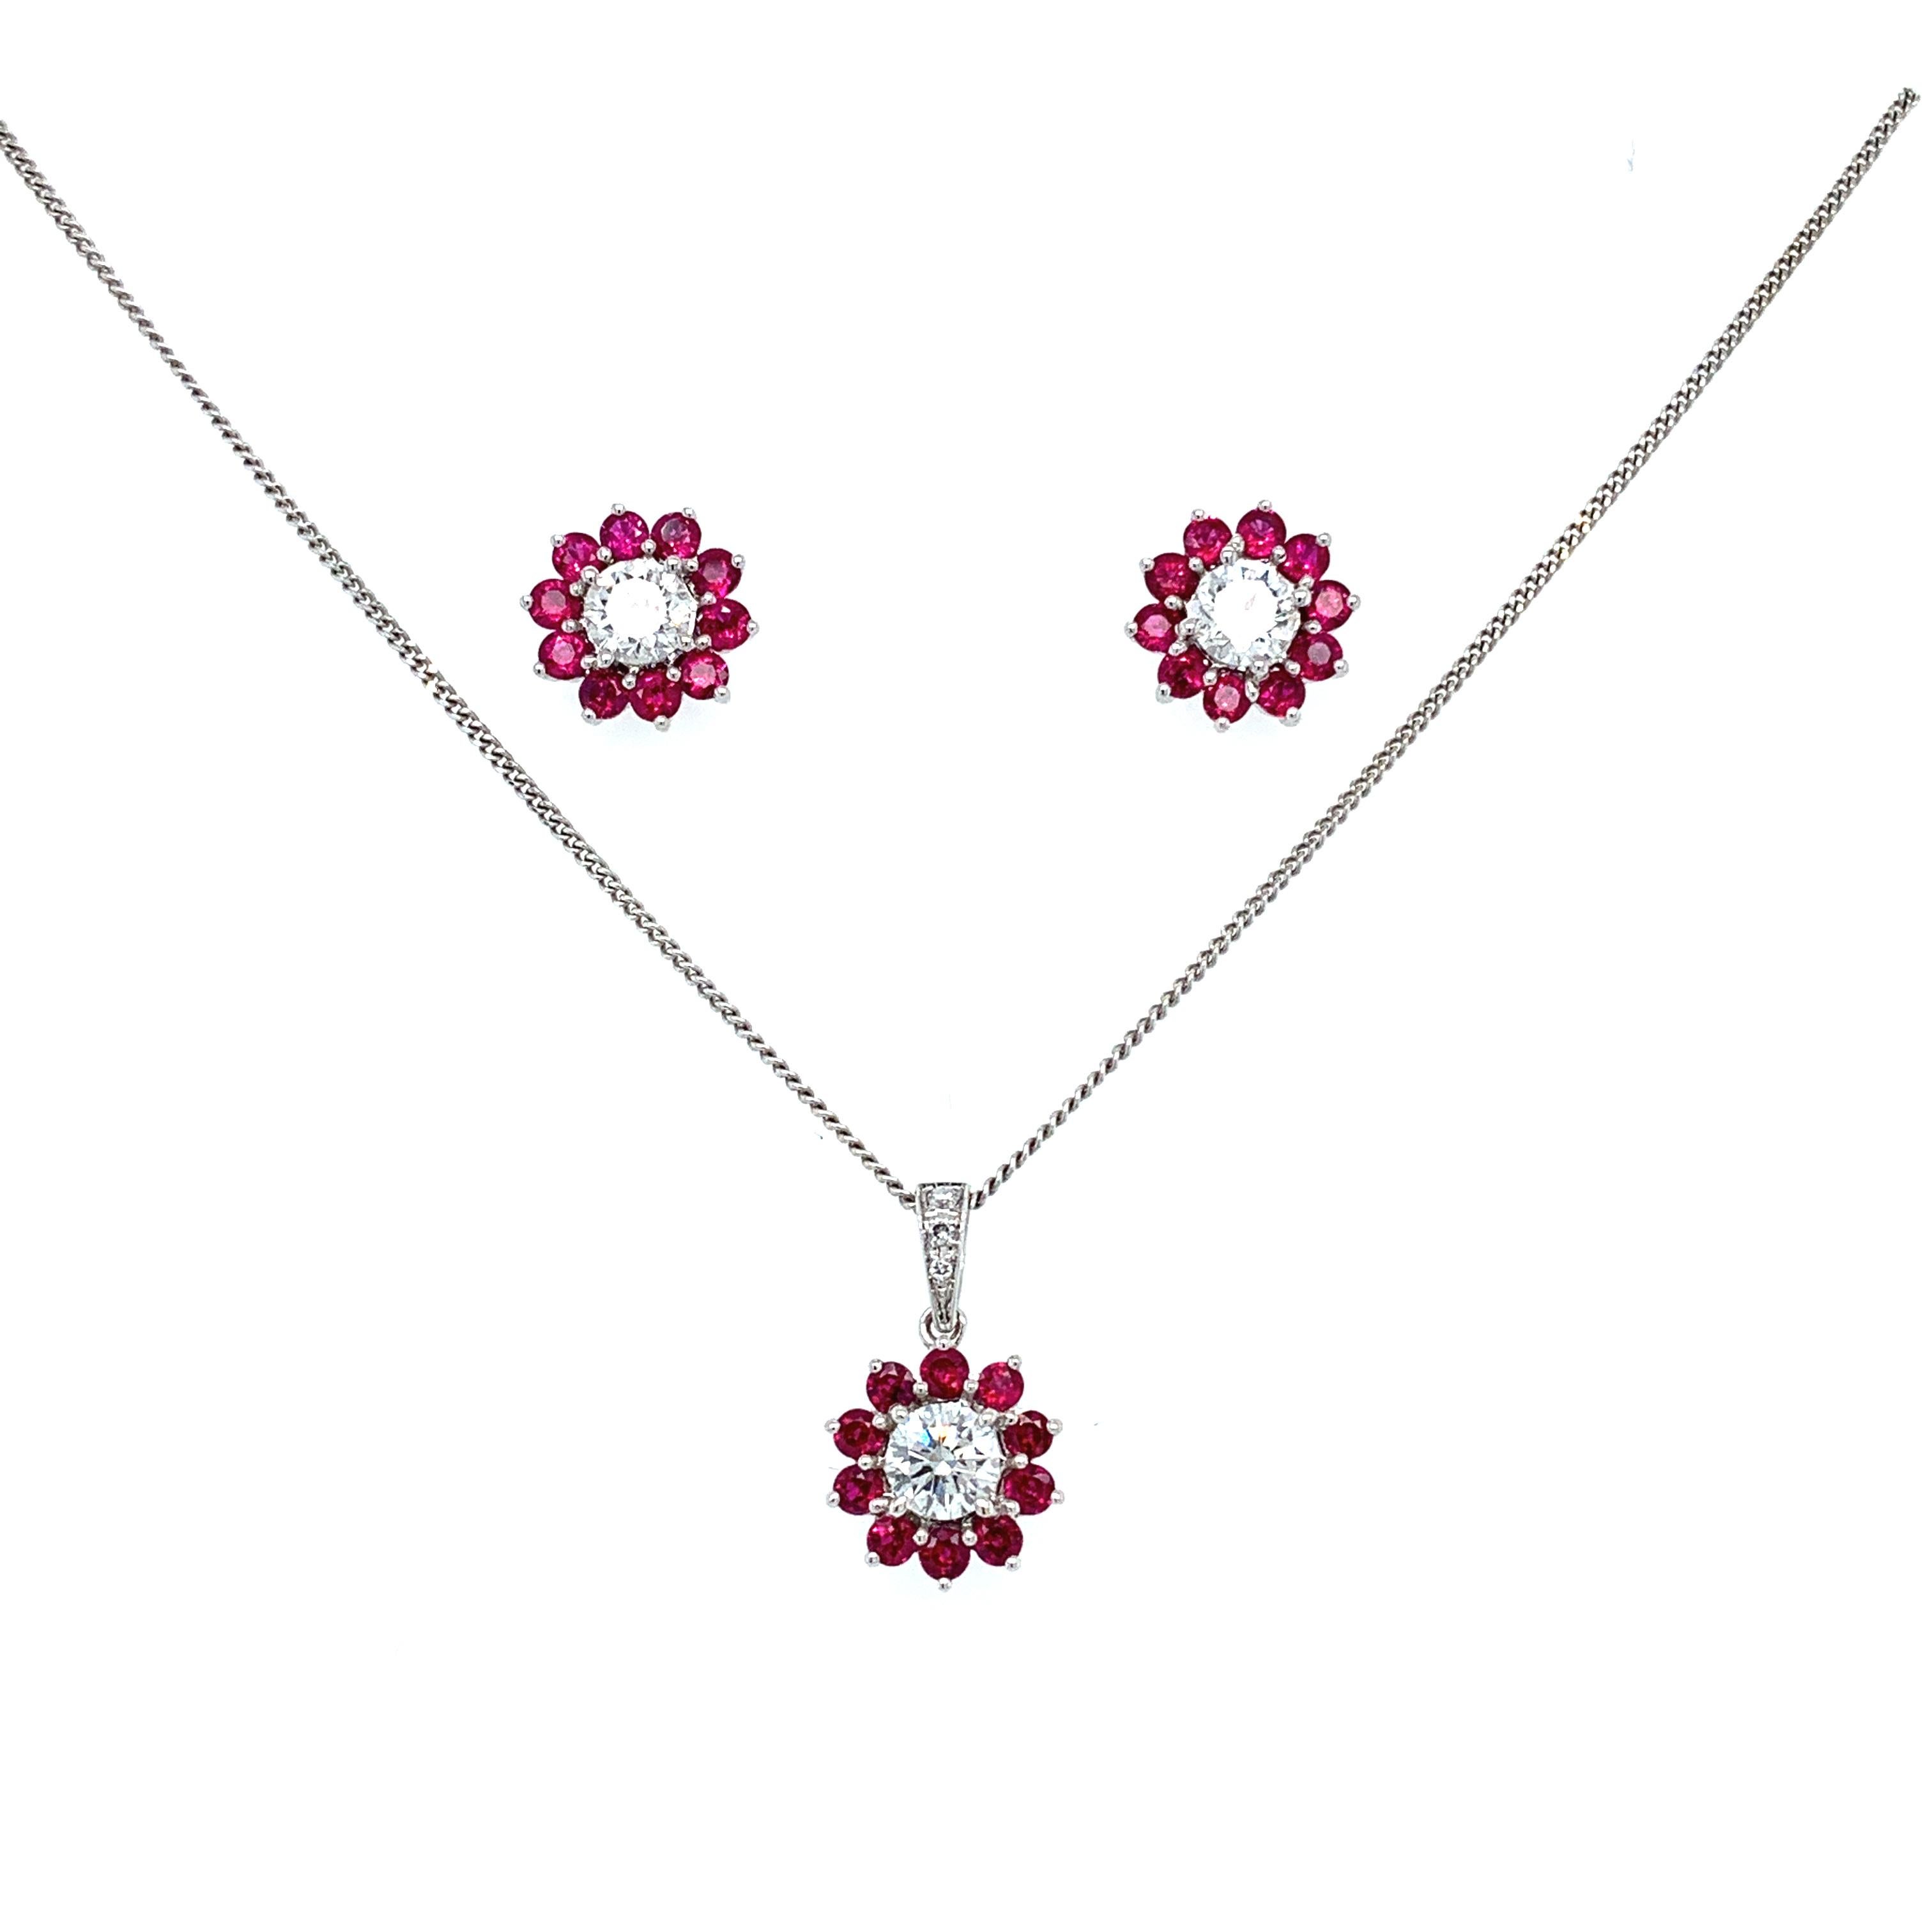 Ruby and diamond cluster pendant 18K white gold
Composed of ruby and diamonds art deco pendant in 18k white gold
Ruby natural gemstone total weight 0.45ct round cut
Diamond solitaire centre stone total weight 0.40ct G colour VS1 clarity
Width of the